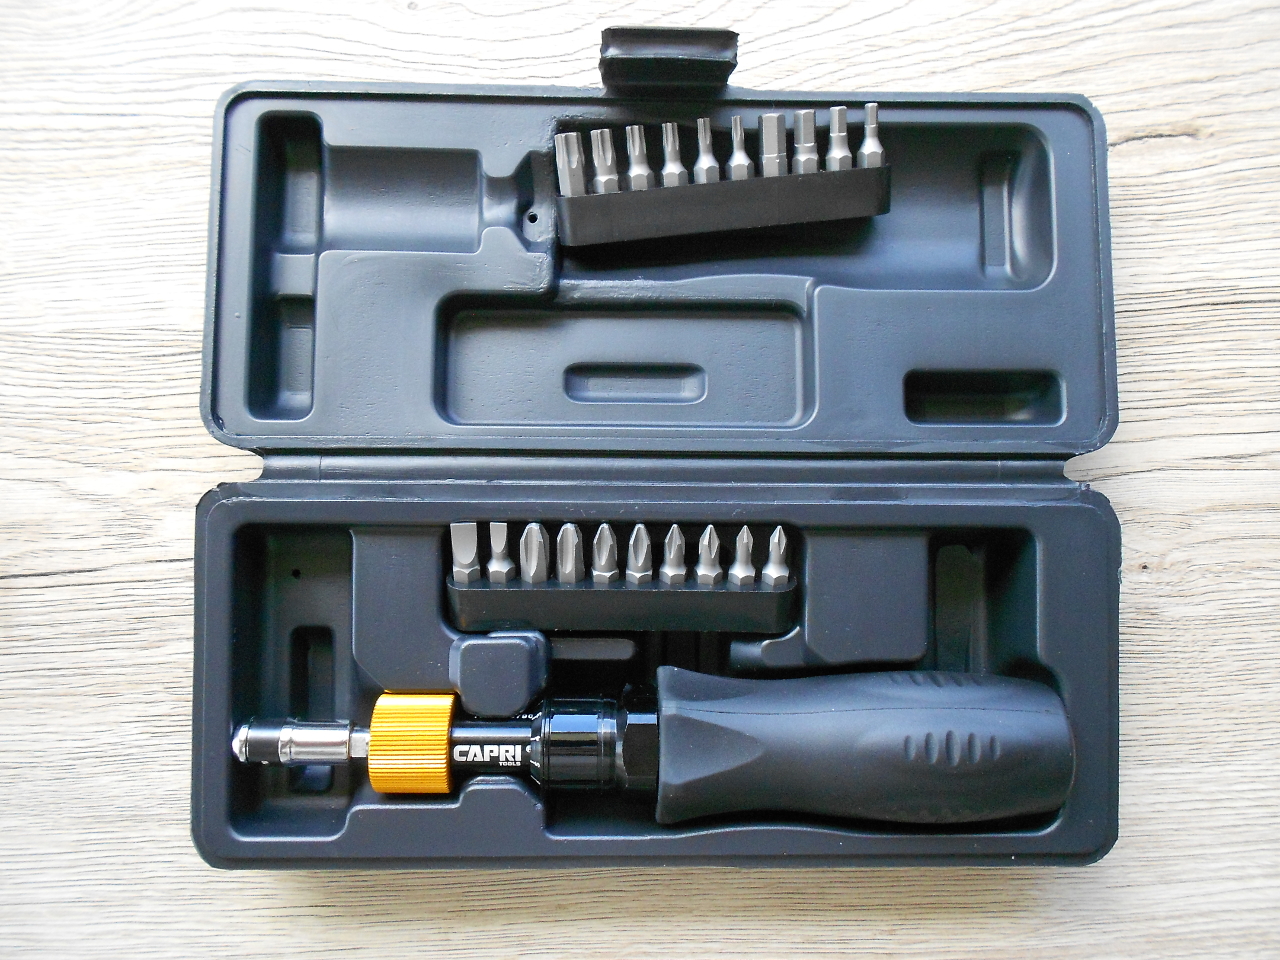 The Capri Tools torque screwdriver is graduated from 10-50 inch-pounds and comes in this convenient storage case complete with most if not all the adapters you will need.